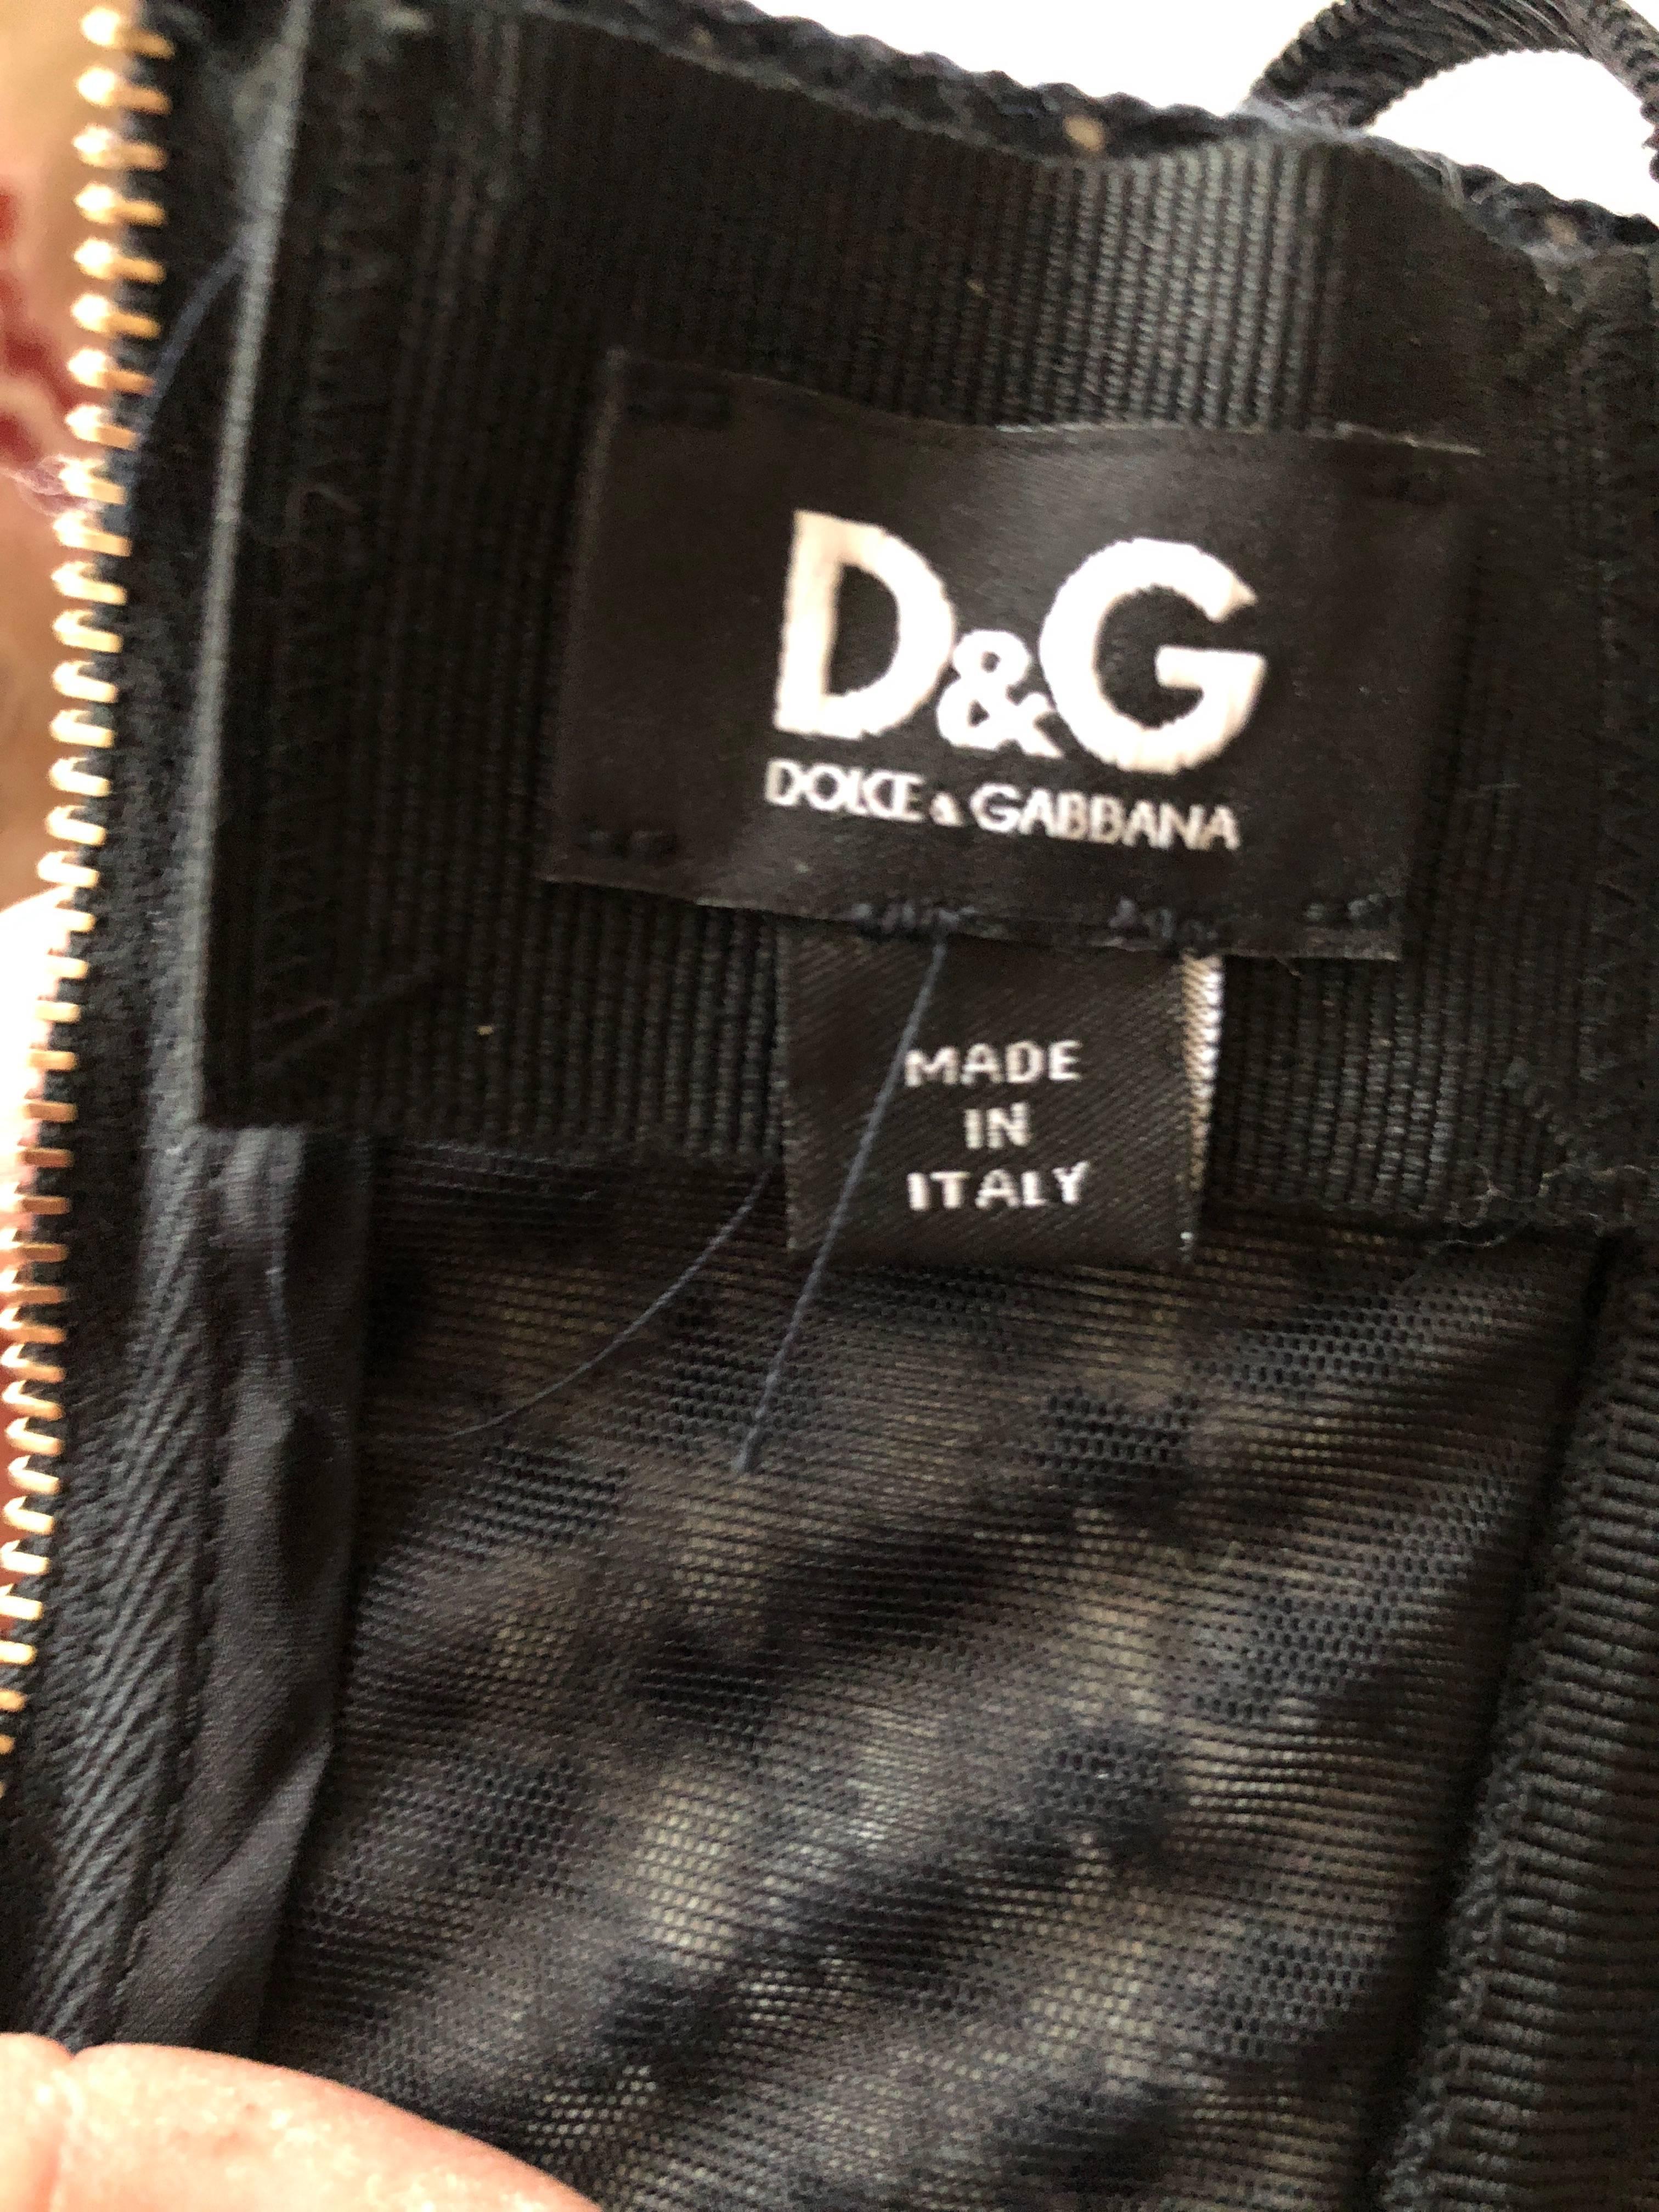   D&G by Dolce & Gabbana Fair Isle Knit Mini Dress with Built In Corset For Sale 5